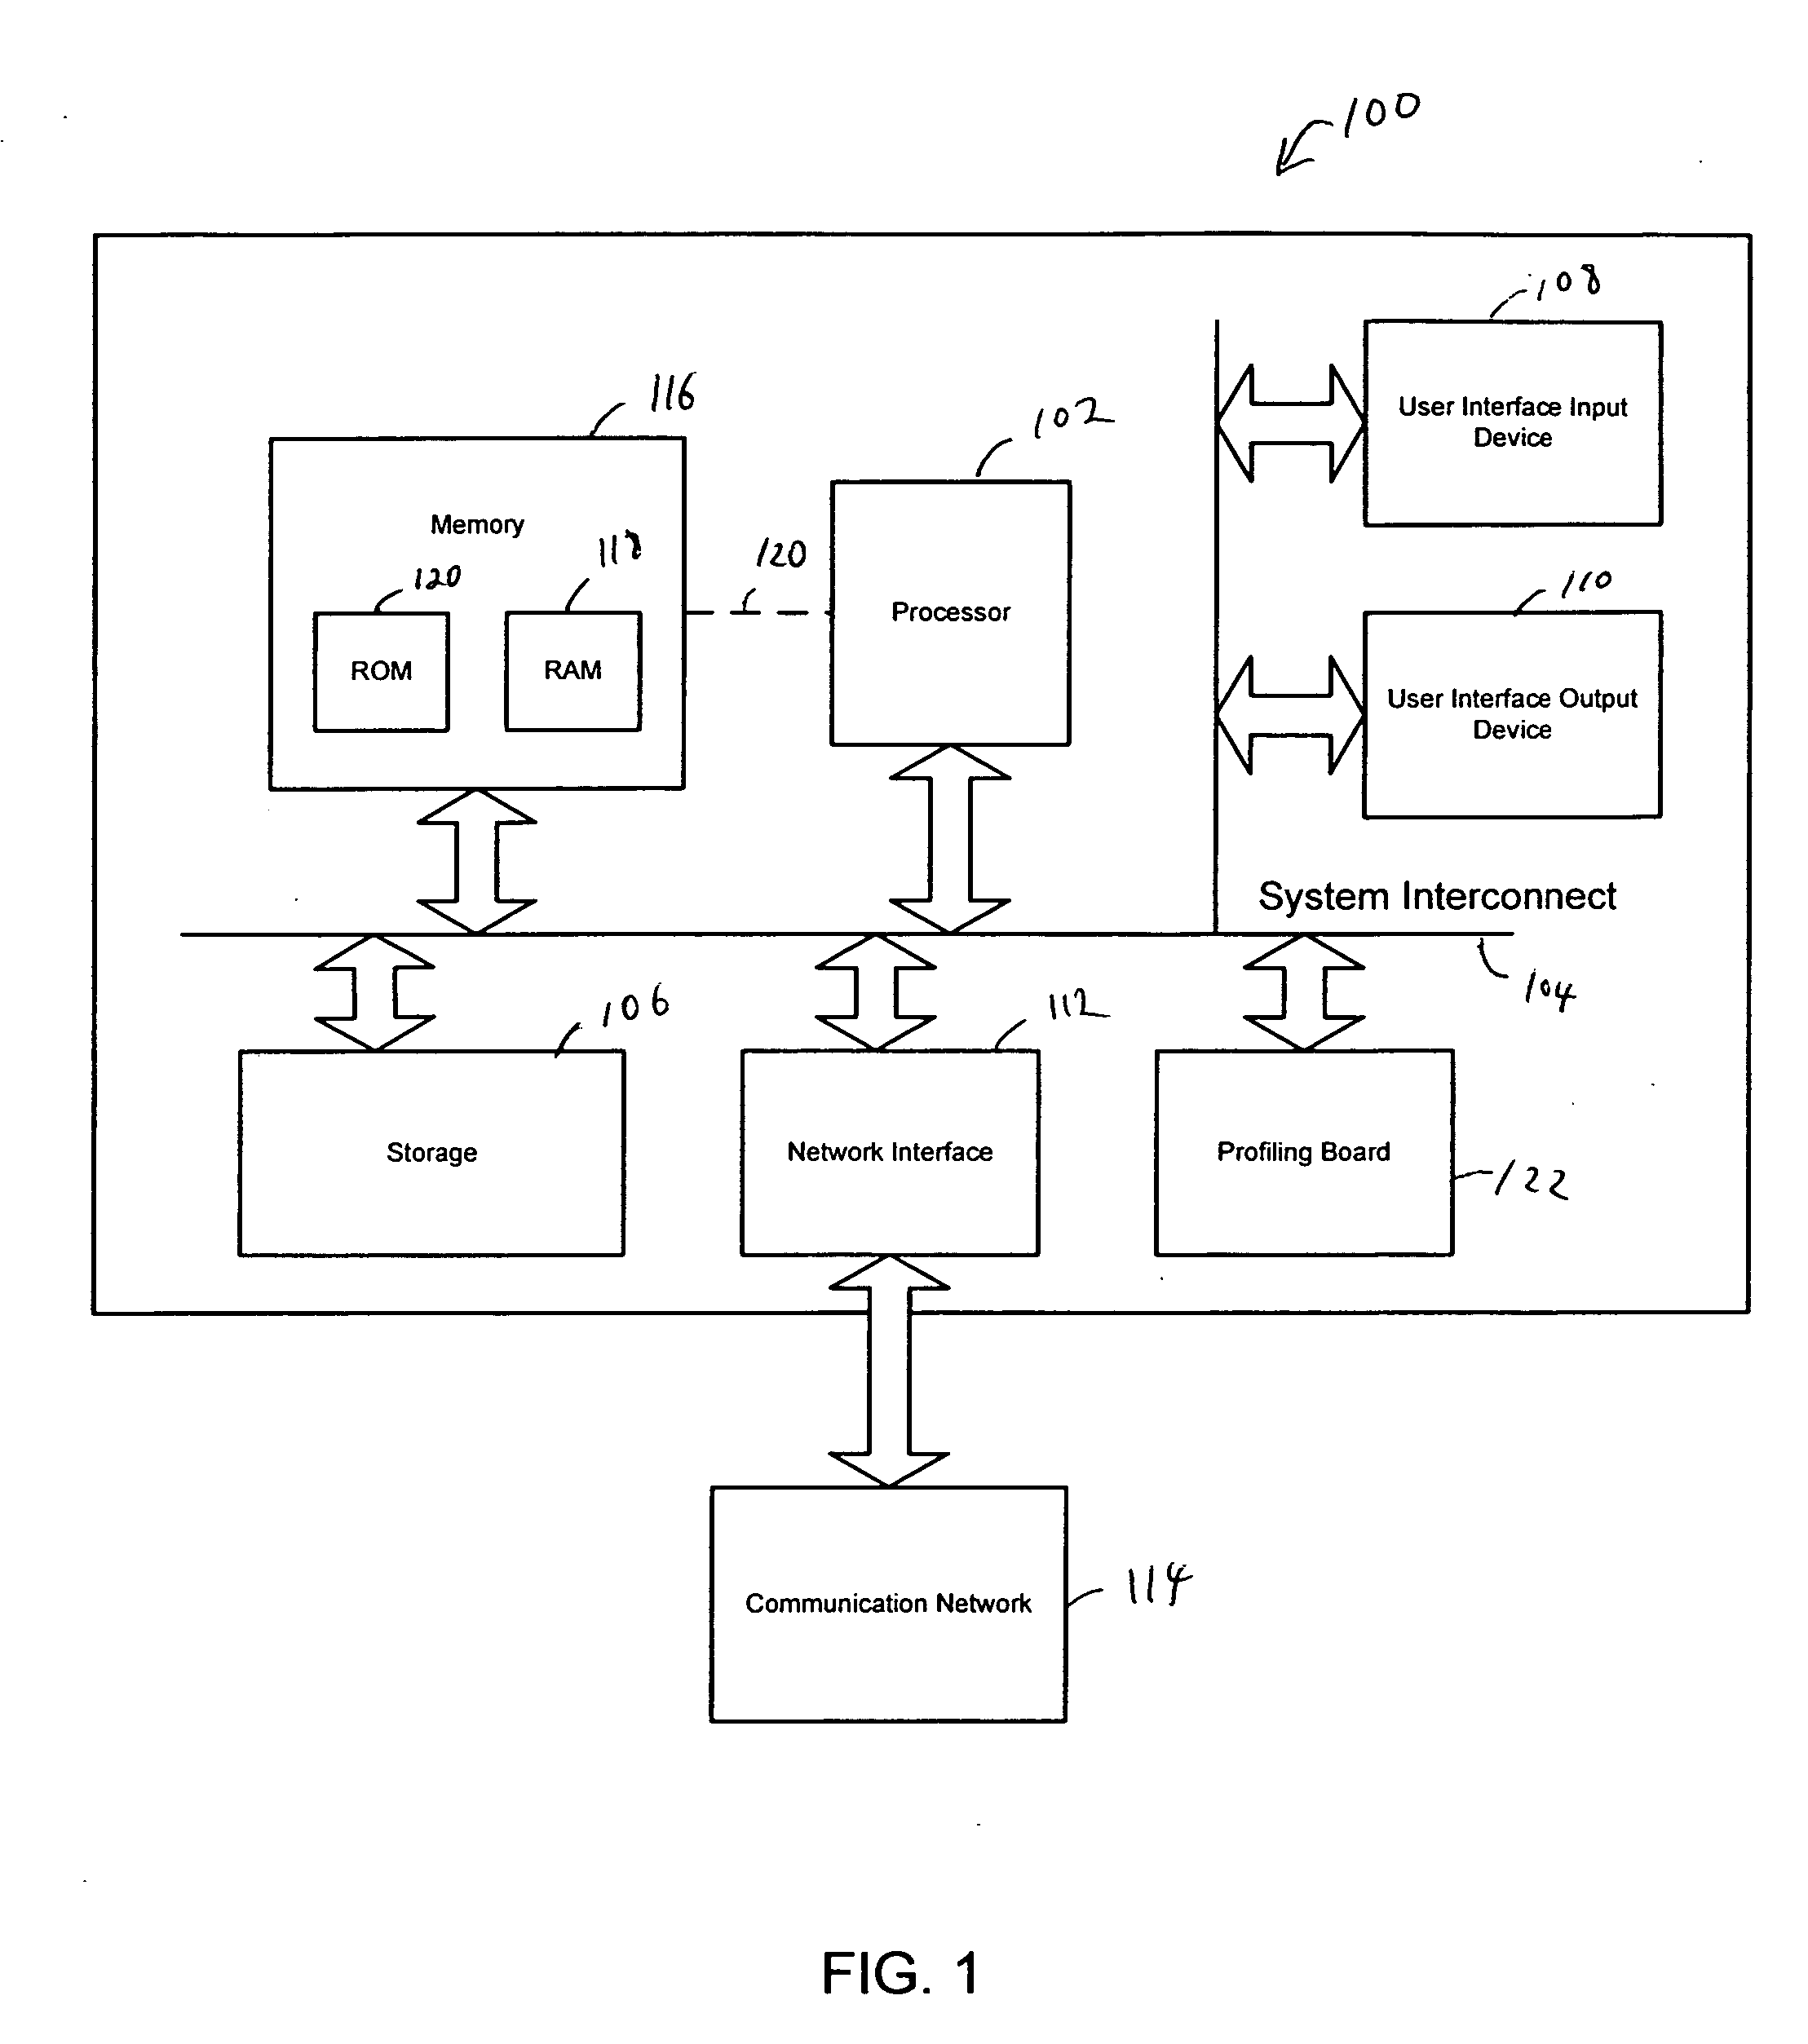 Hardware environment for low-overhead profiling